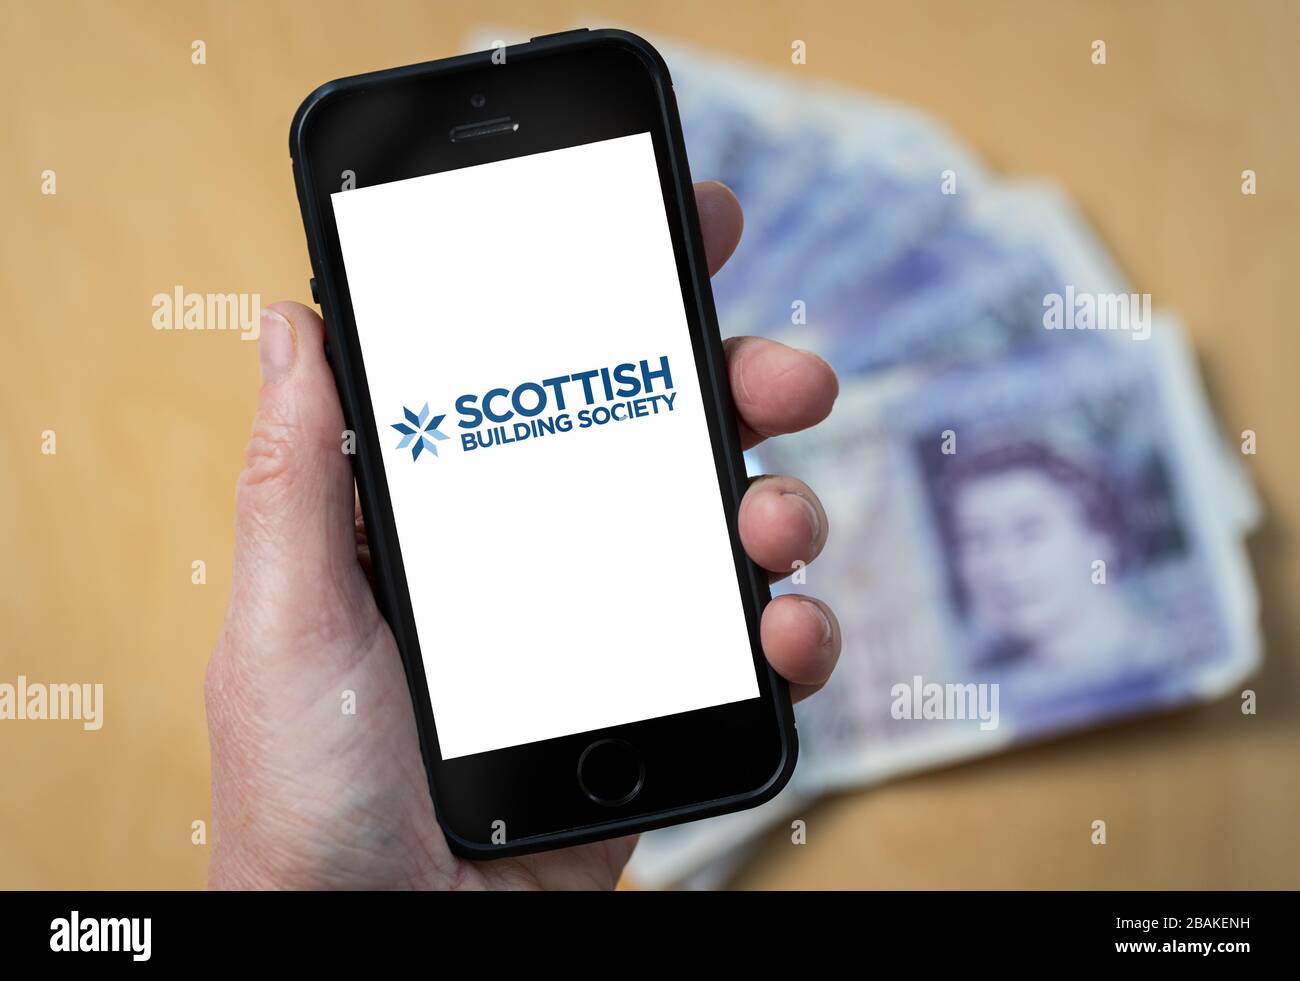 A woman holding a mobile phone showing Scottish Building Society (editorial use only) Stock Photo